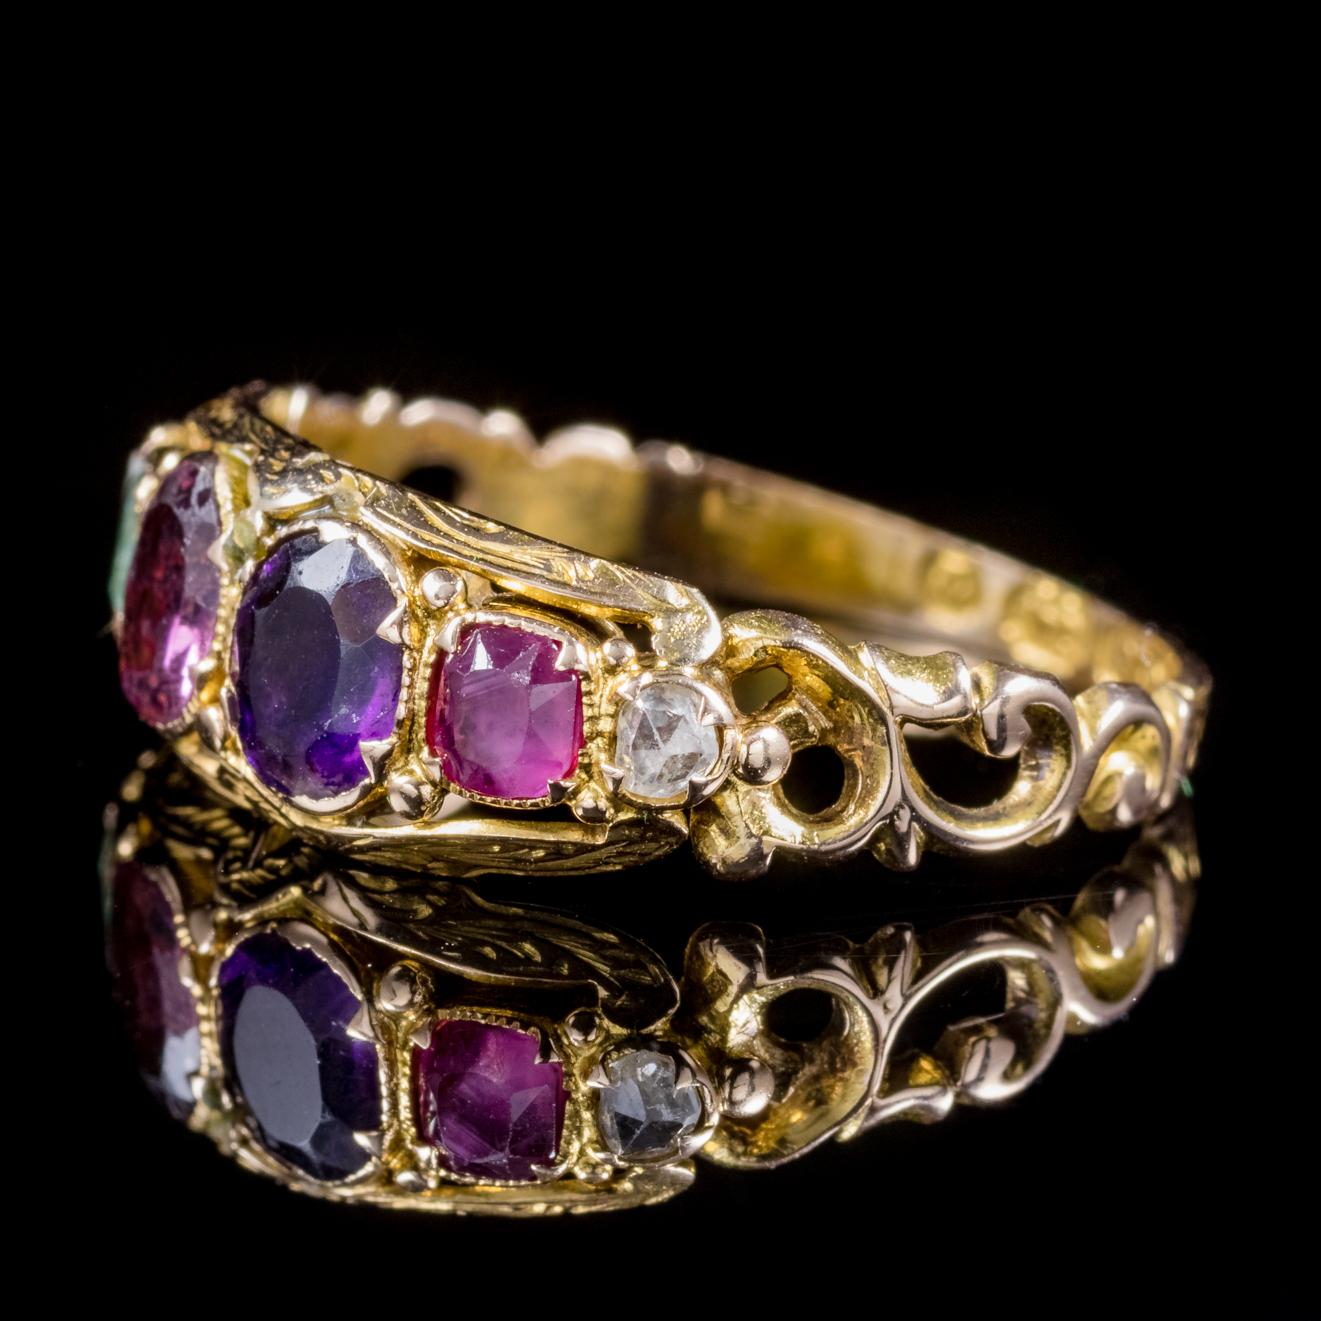 This beautiful antique Victorian Regard ring is fully hallmarked and dated Birmingham 1868. 

Set with six colourful gemstones in varying shapes and sizes that spell out the word ‘Regard’ with each first letter of the stone – Ruby – Emerald – Garnet